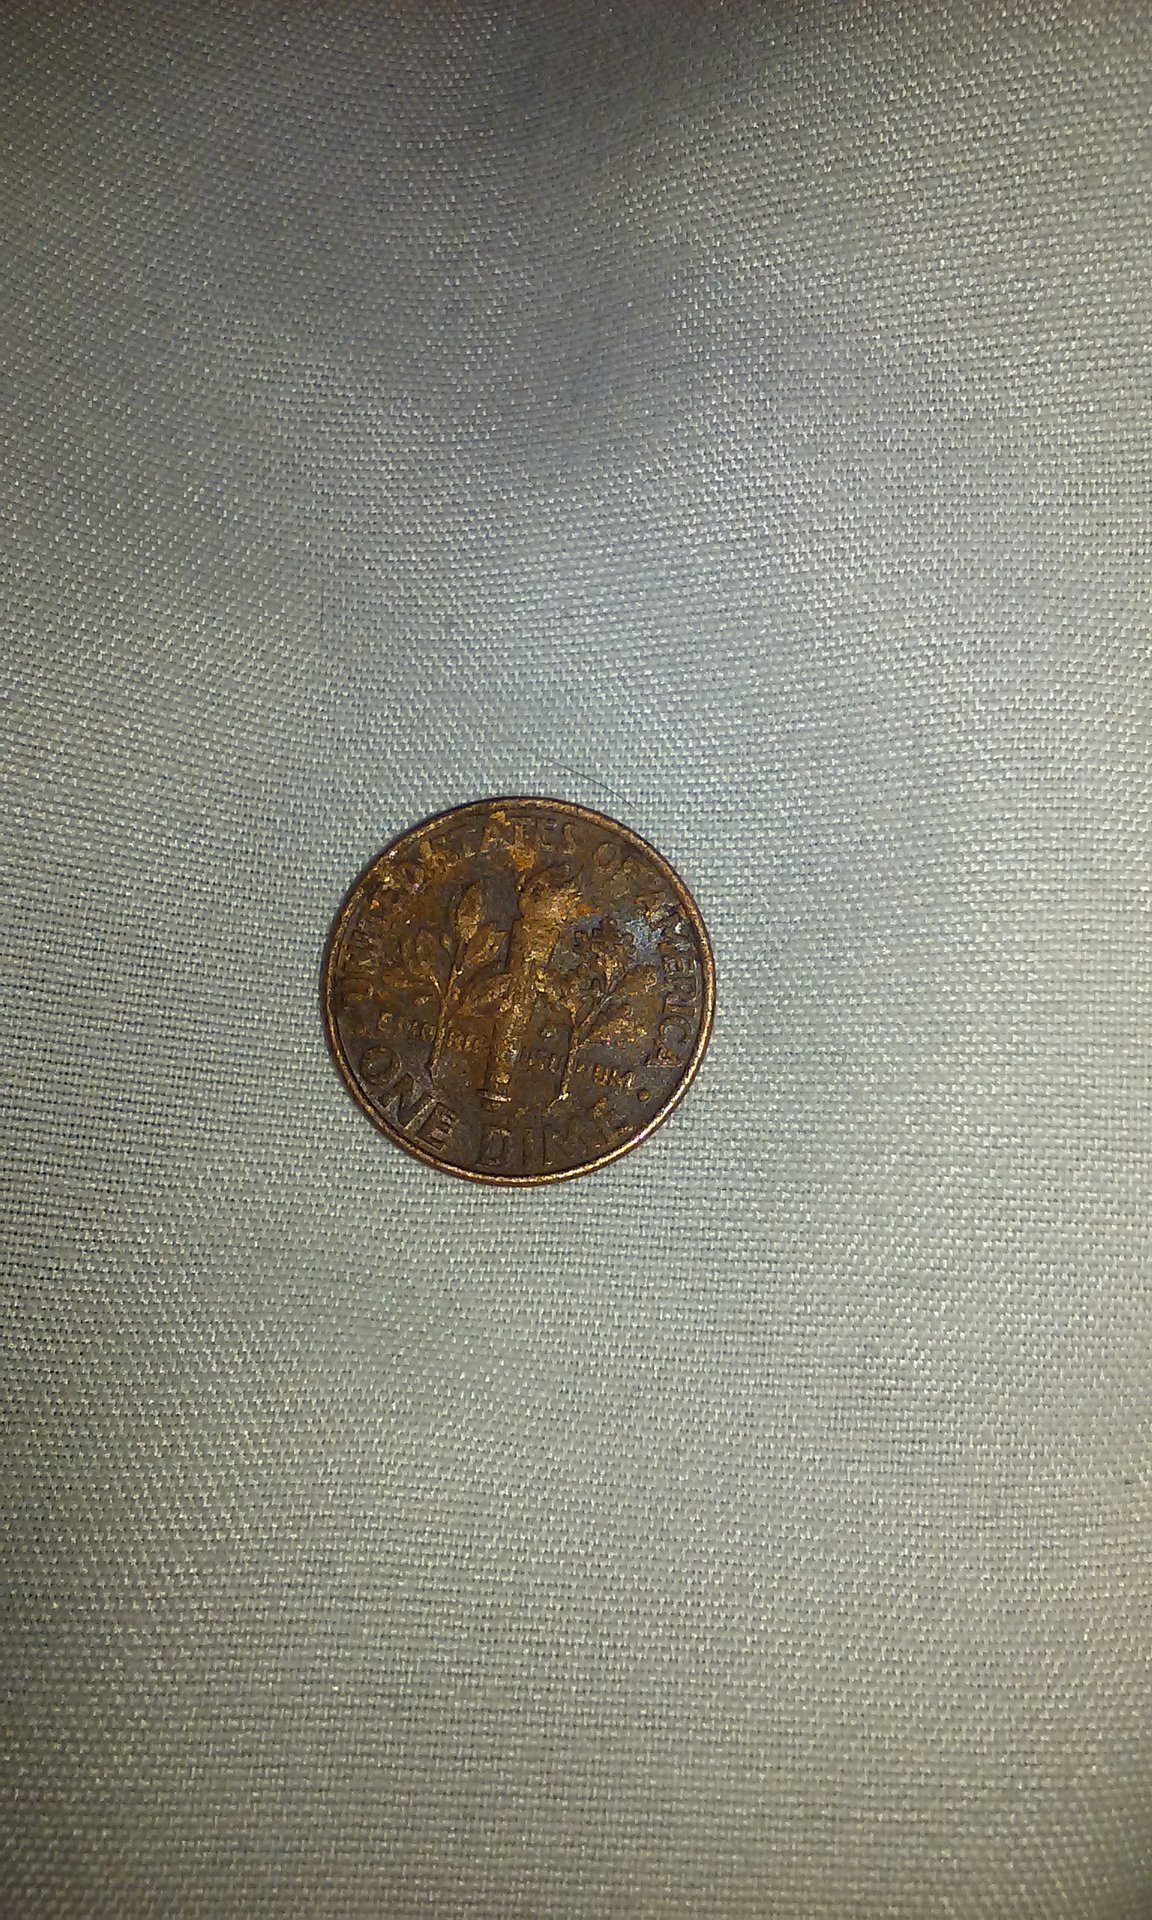 What is a copper dime?